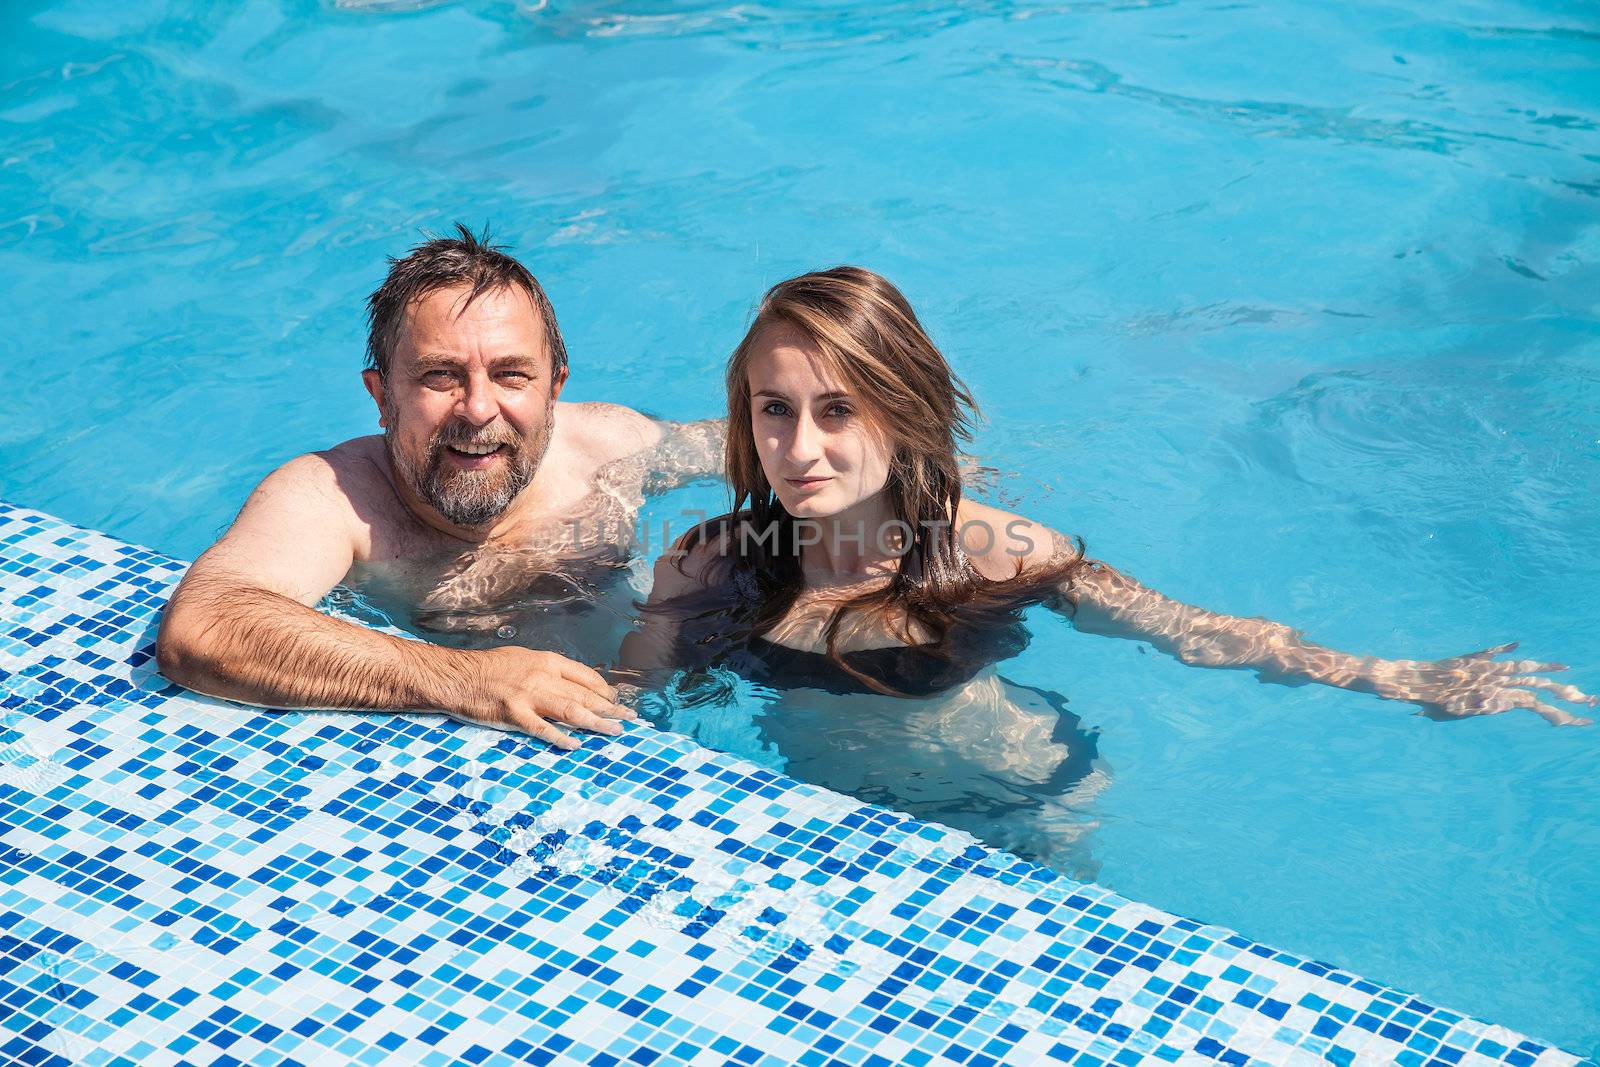  Father and daughter swimming in the poo by palinchak